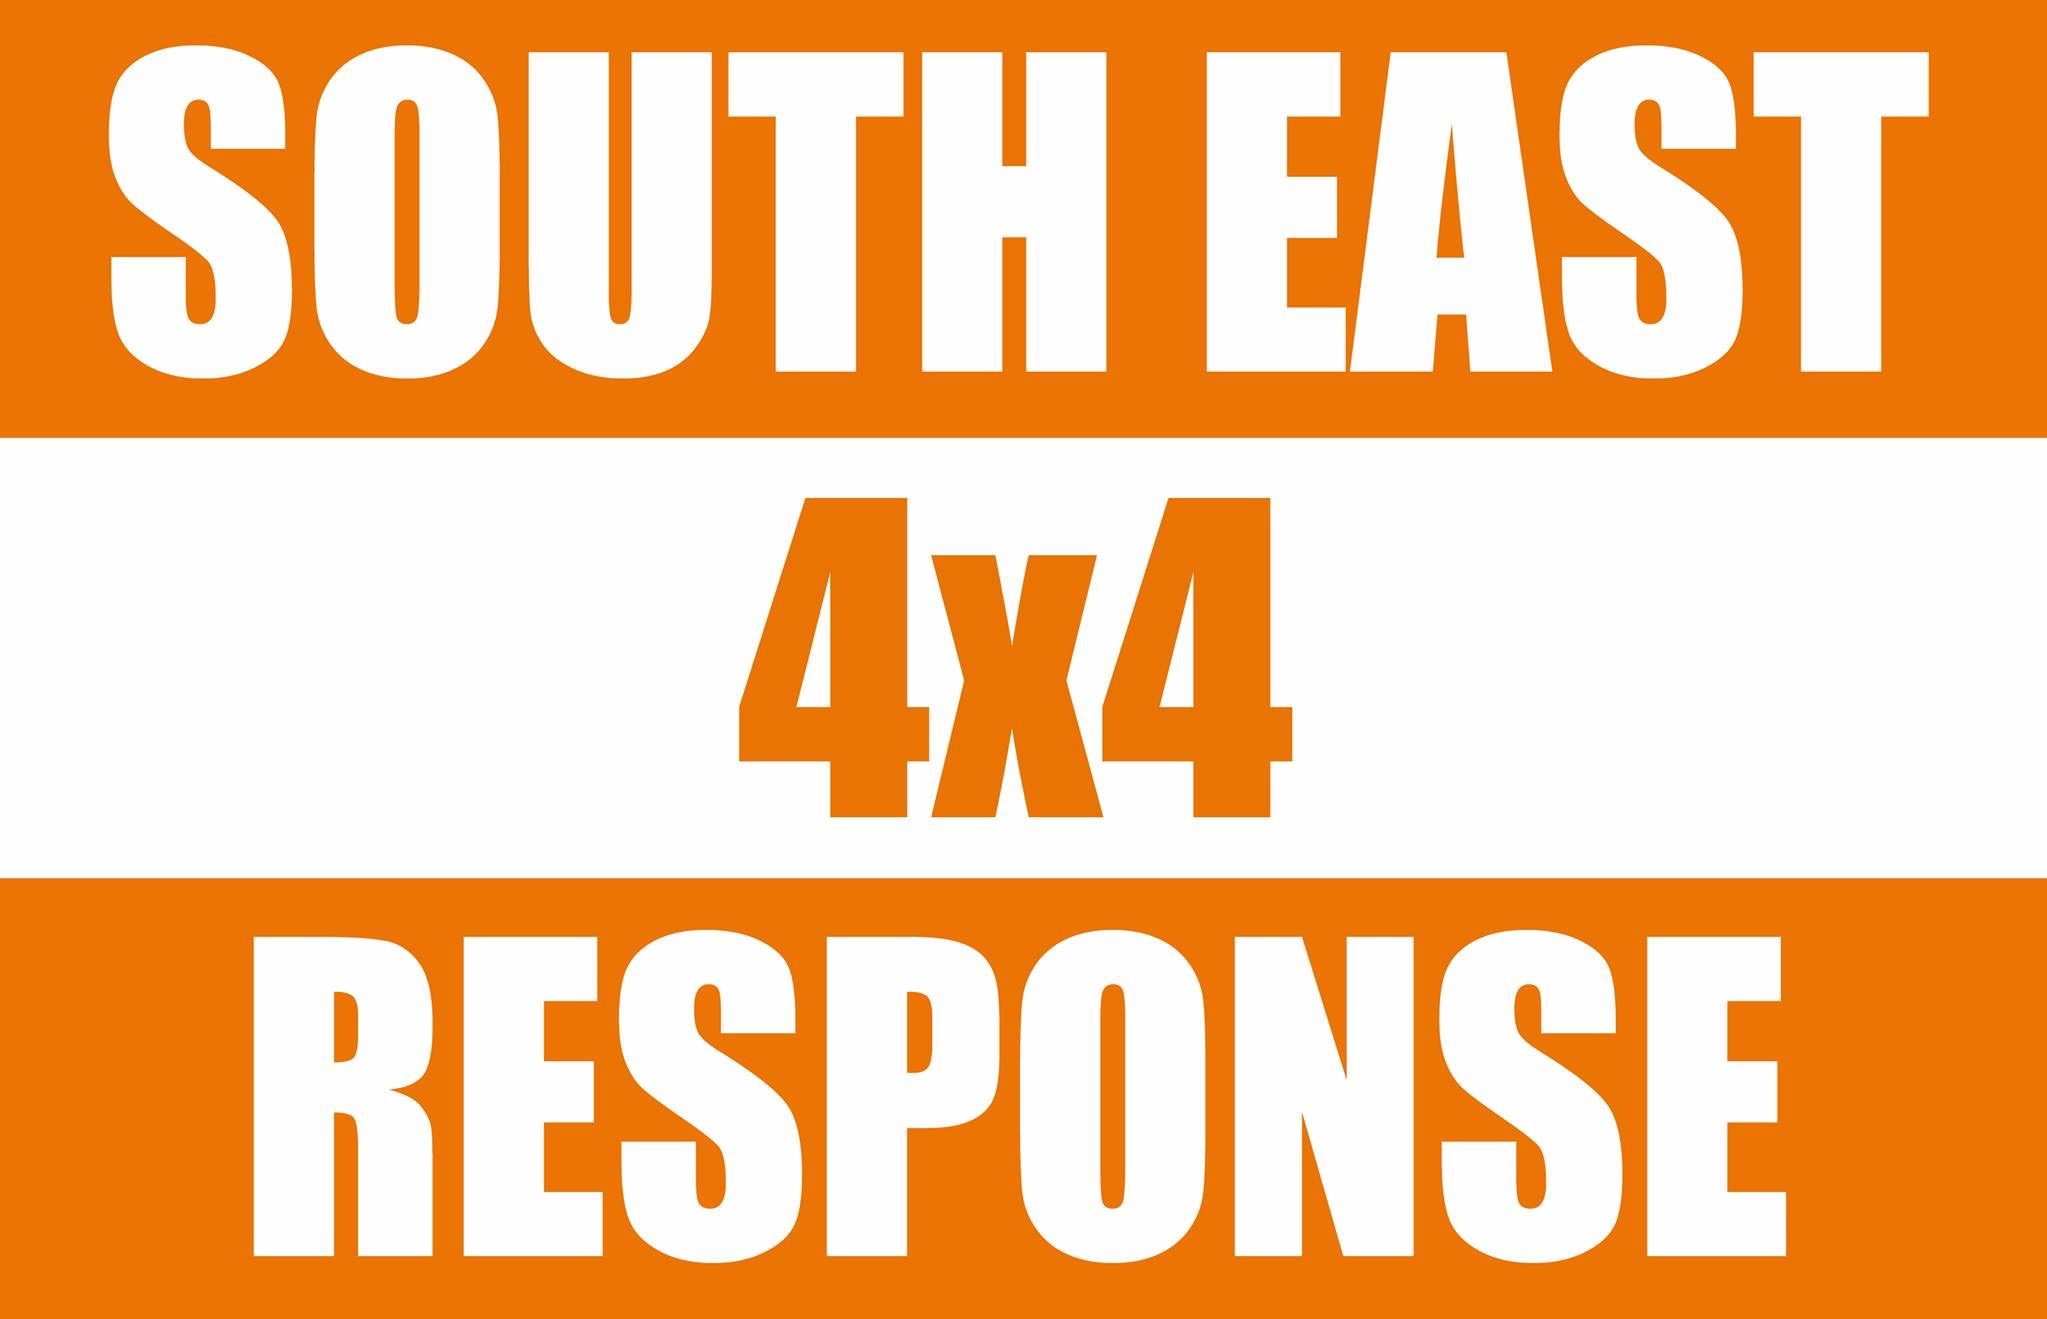 South East 4×4 Response